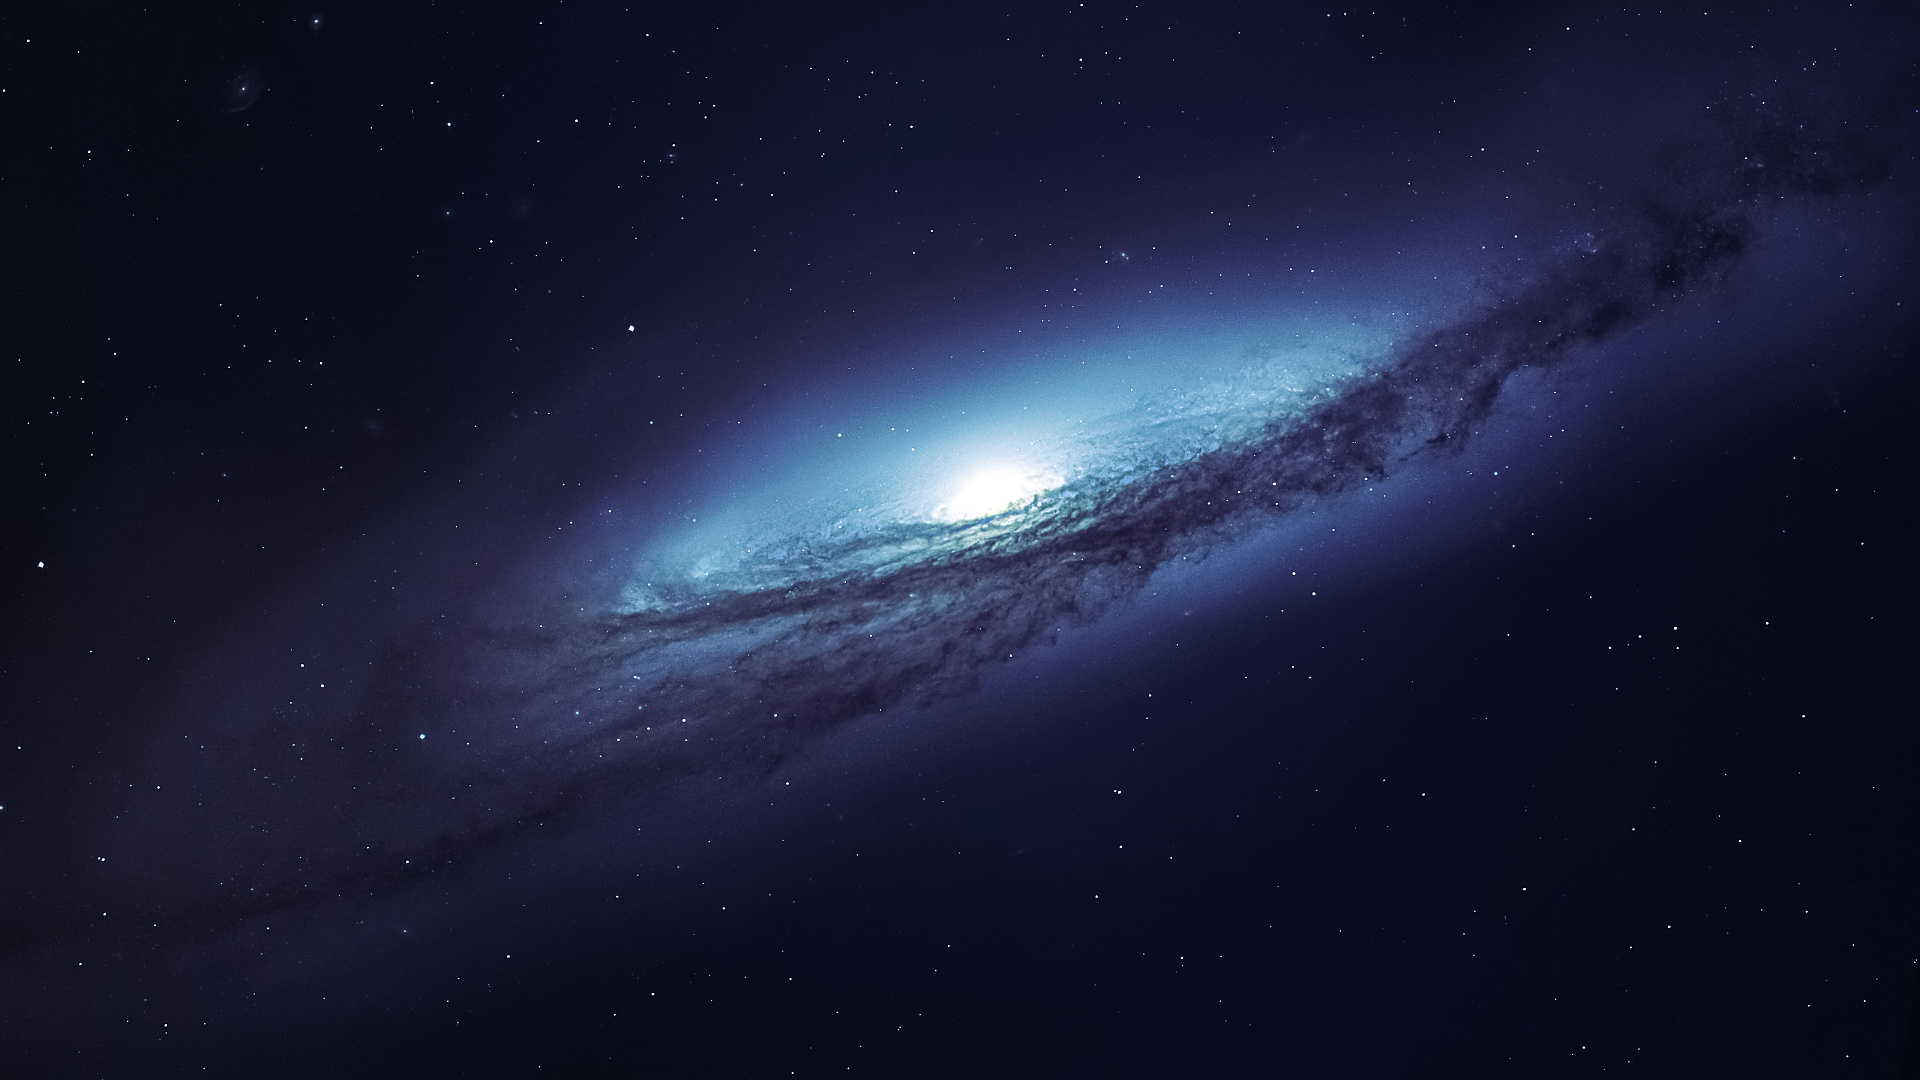 weltall wallpaper,sky,atmosphere,outer space,galaxy,astronomical object